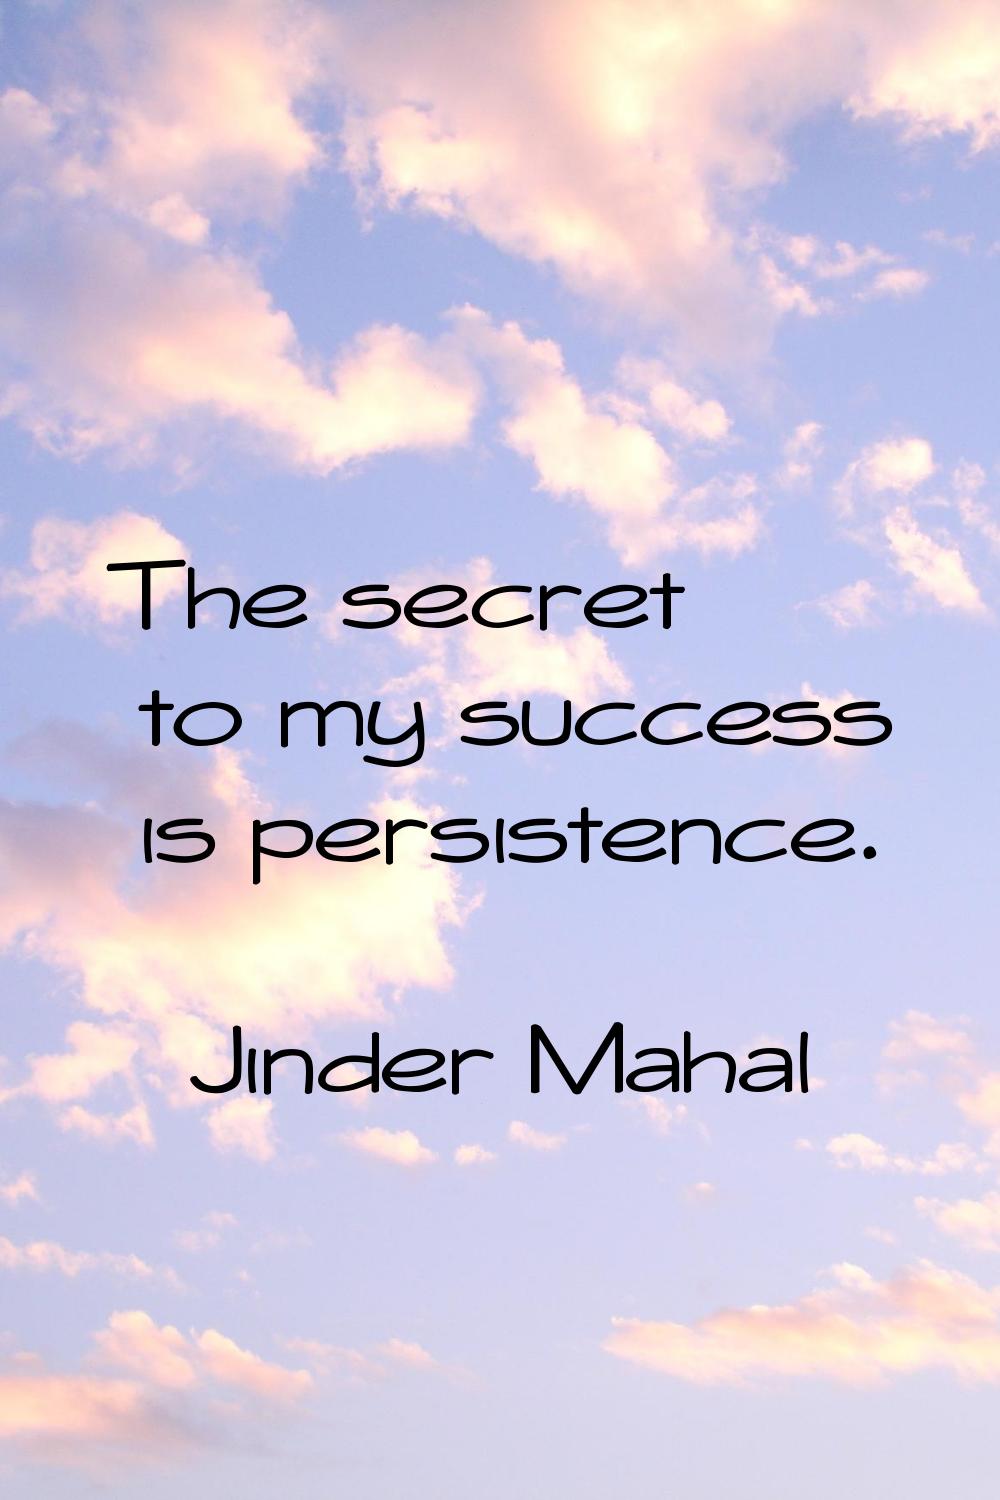 The secret to my success is persistence.